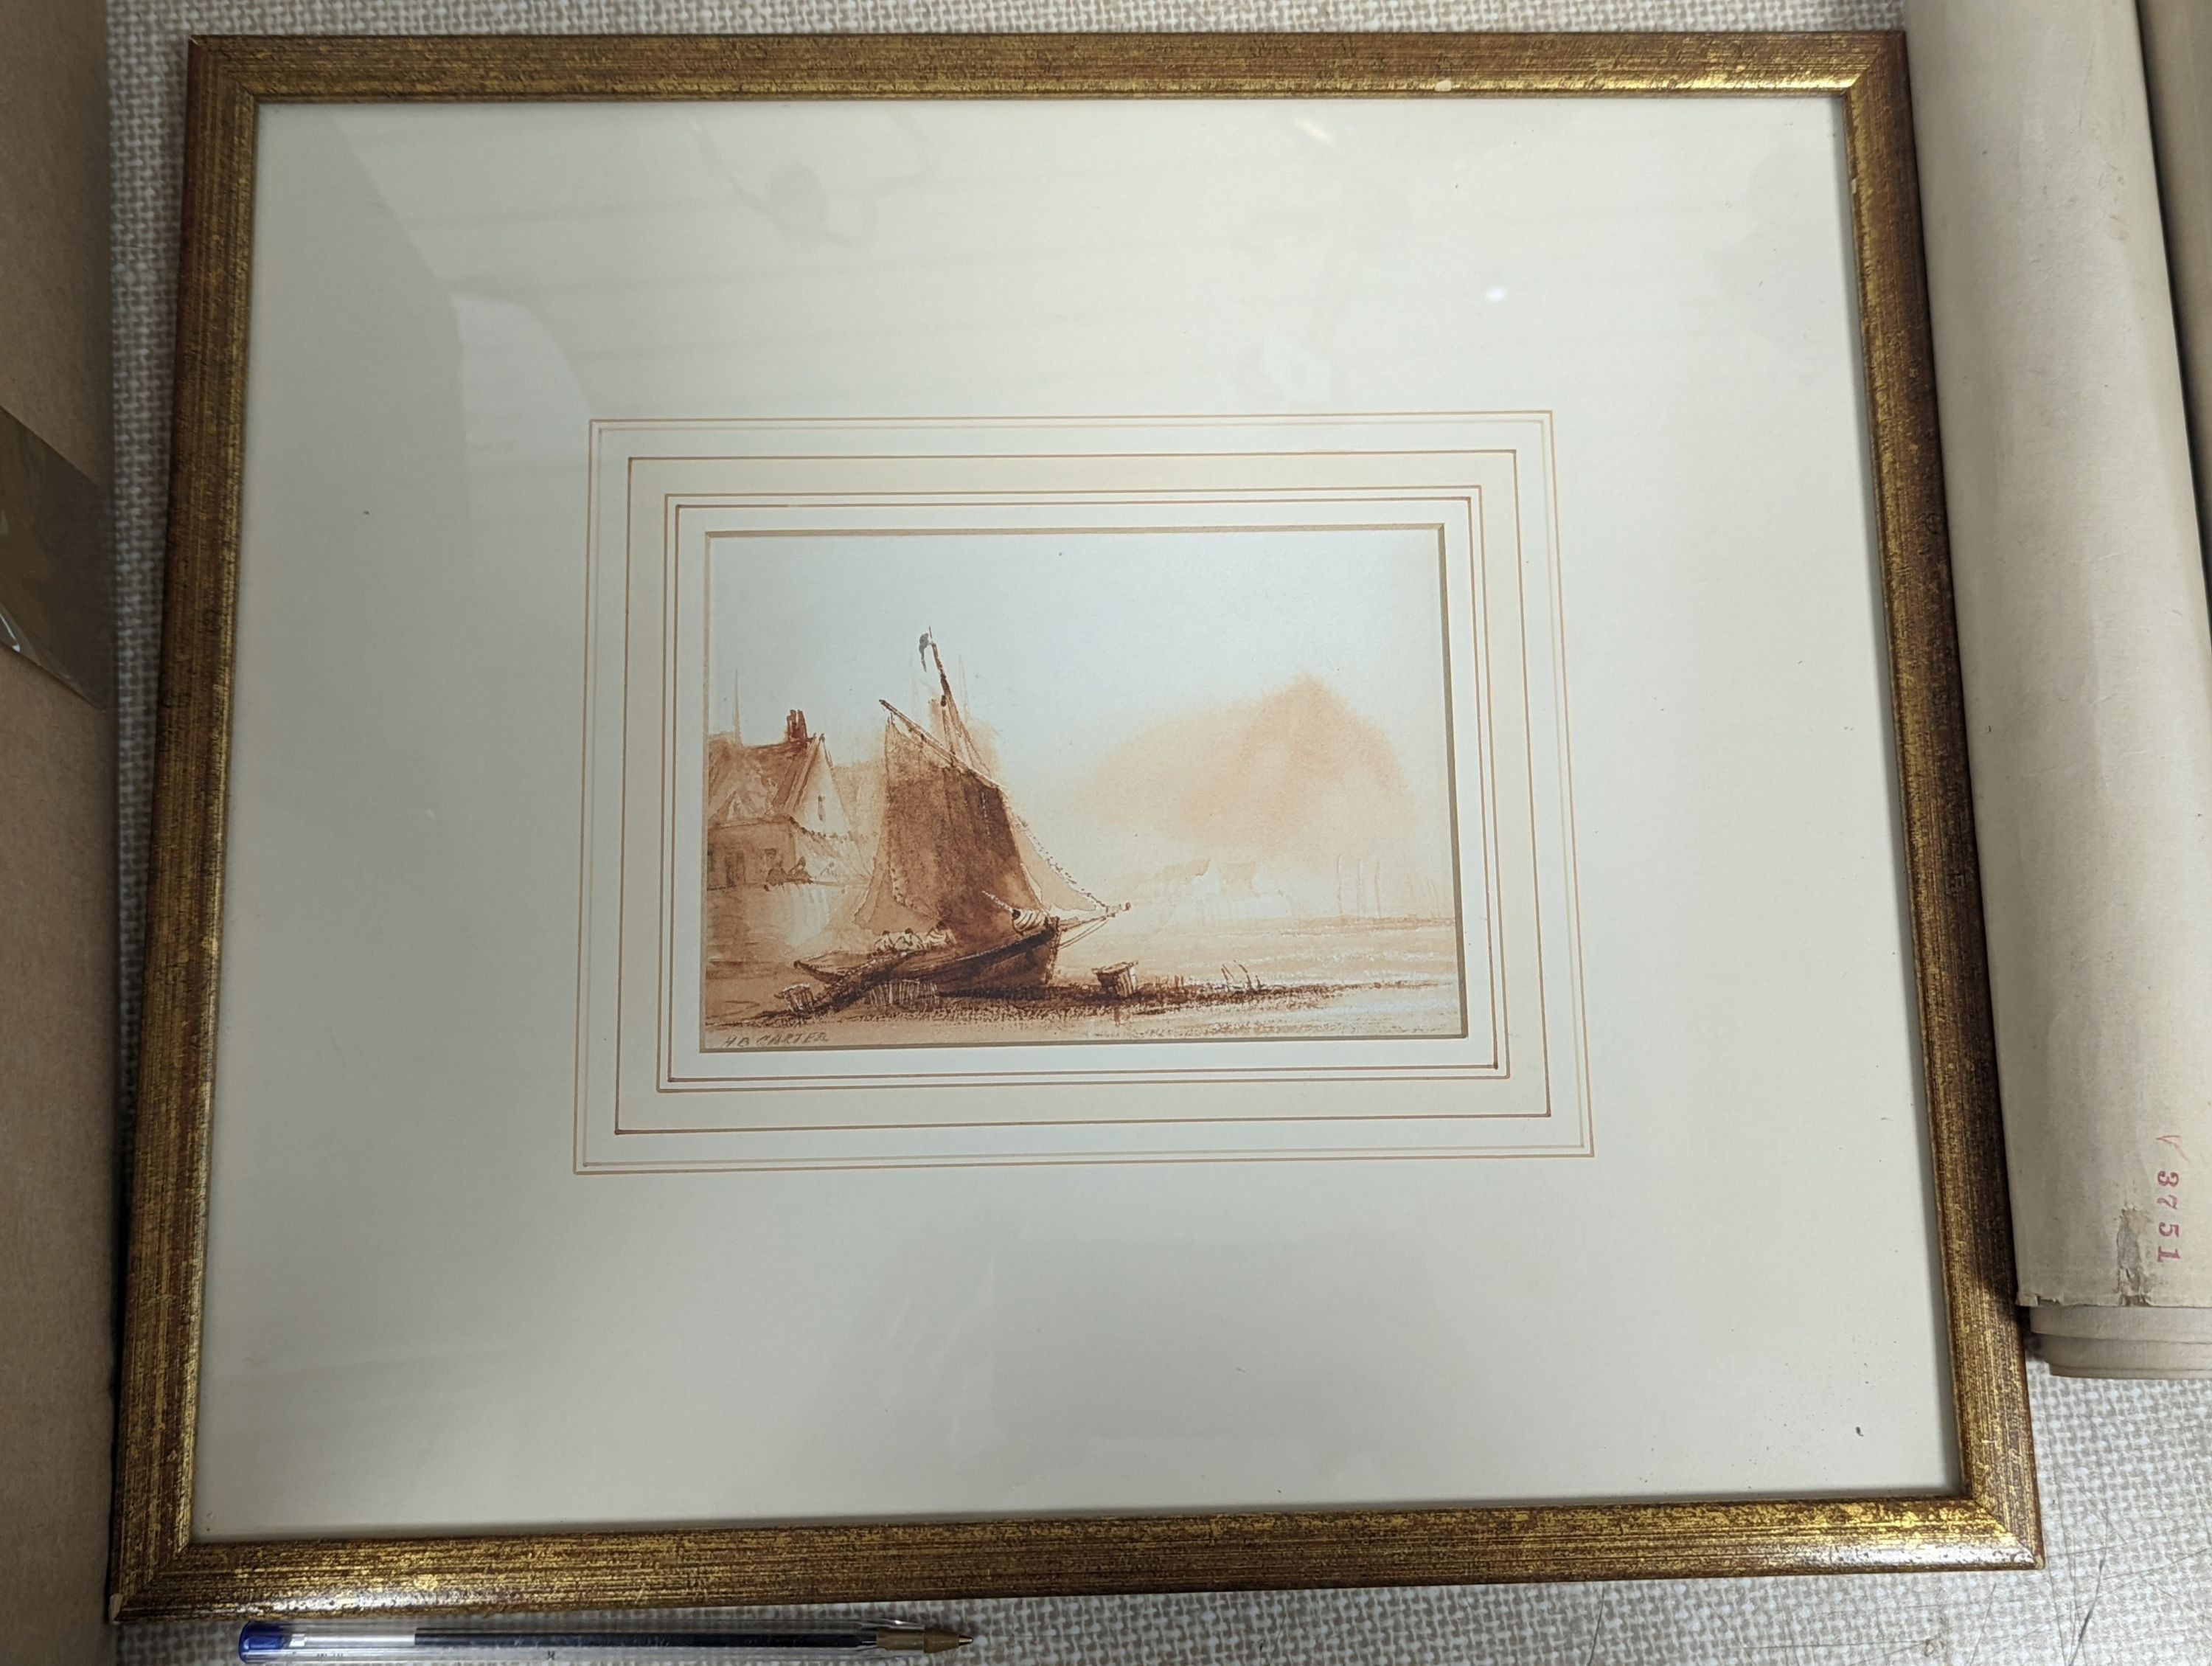 Henry Barlow Carter, (1803-1867), ‘Sailing Vessel on a Beach’, framed sepia watercolour, signed. 11x16cm